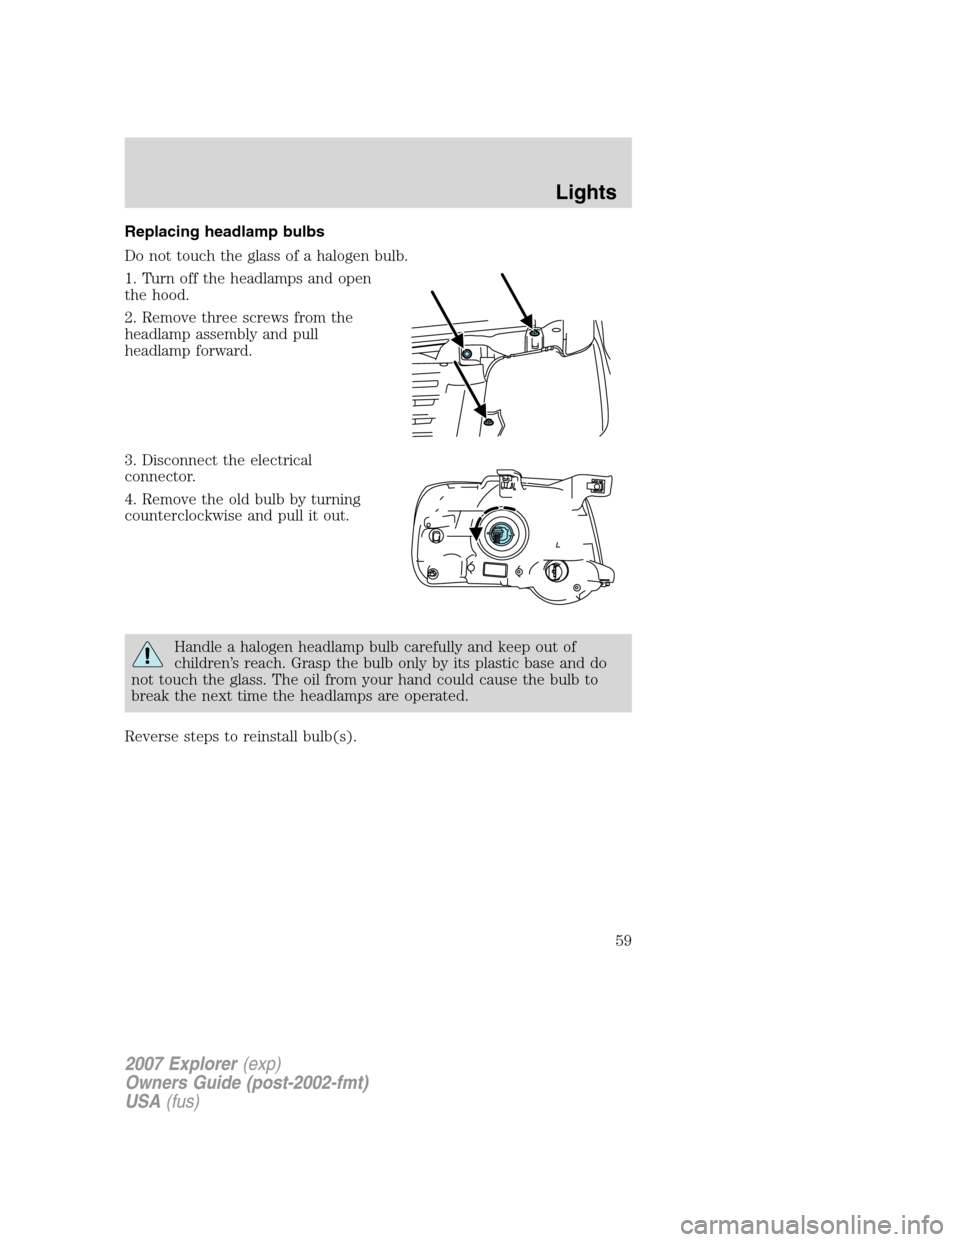 FORD EXPLORER 2007 4.G Owners Manual Replacing headlamp bulbs
Do not touch the glass of a halogen bulb.
1. Turn off the headlamps and open
the hood.
2. Remove three screws from the
headlamp assembly and pull
headlamp forward.
3. Disconne